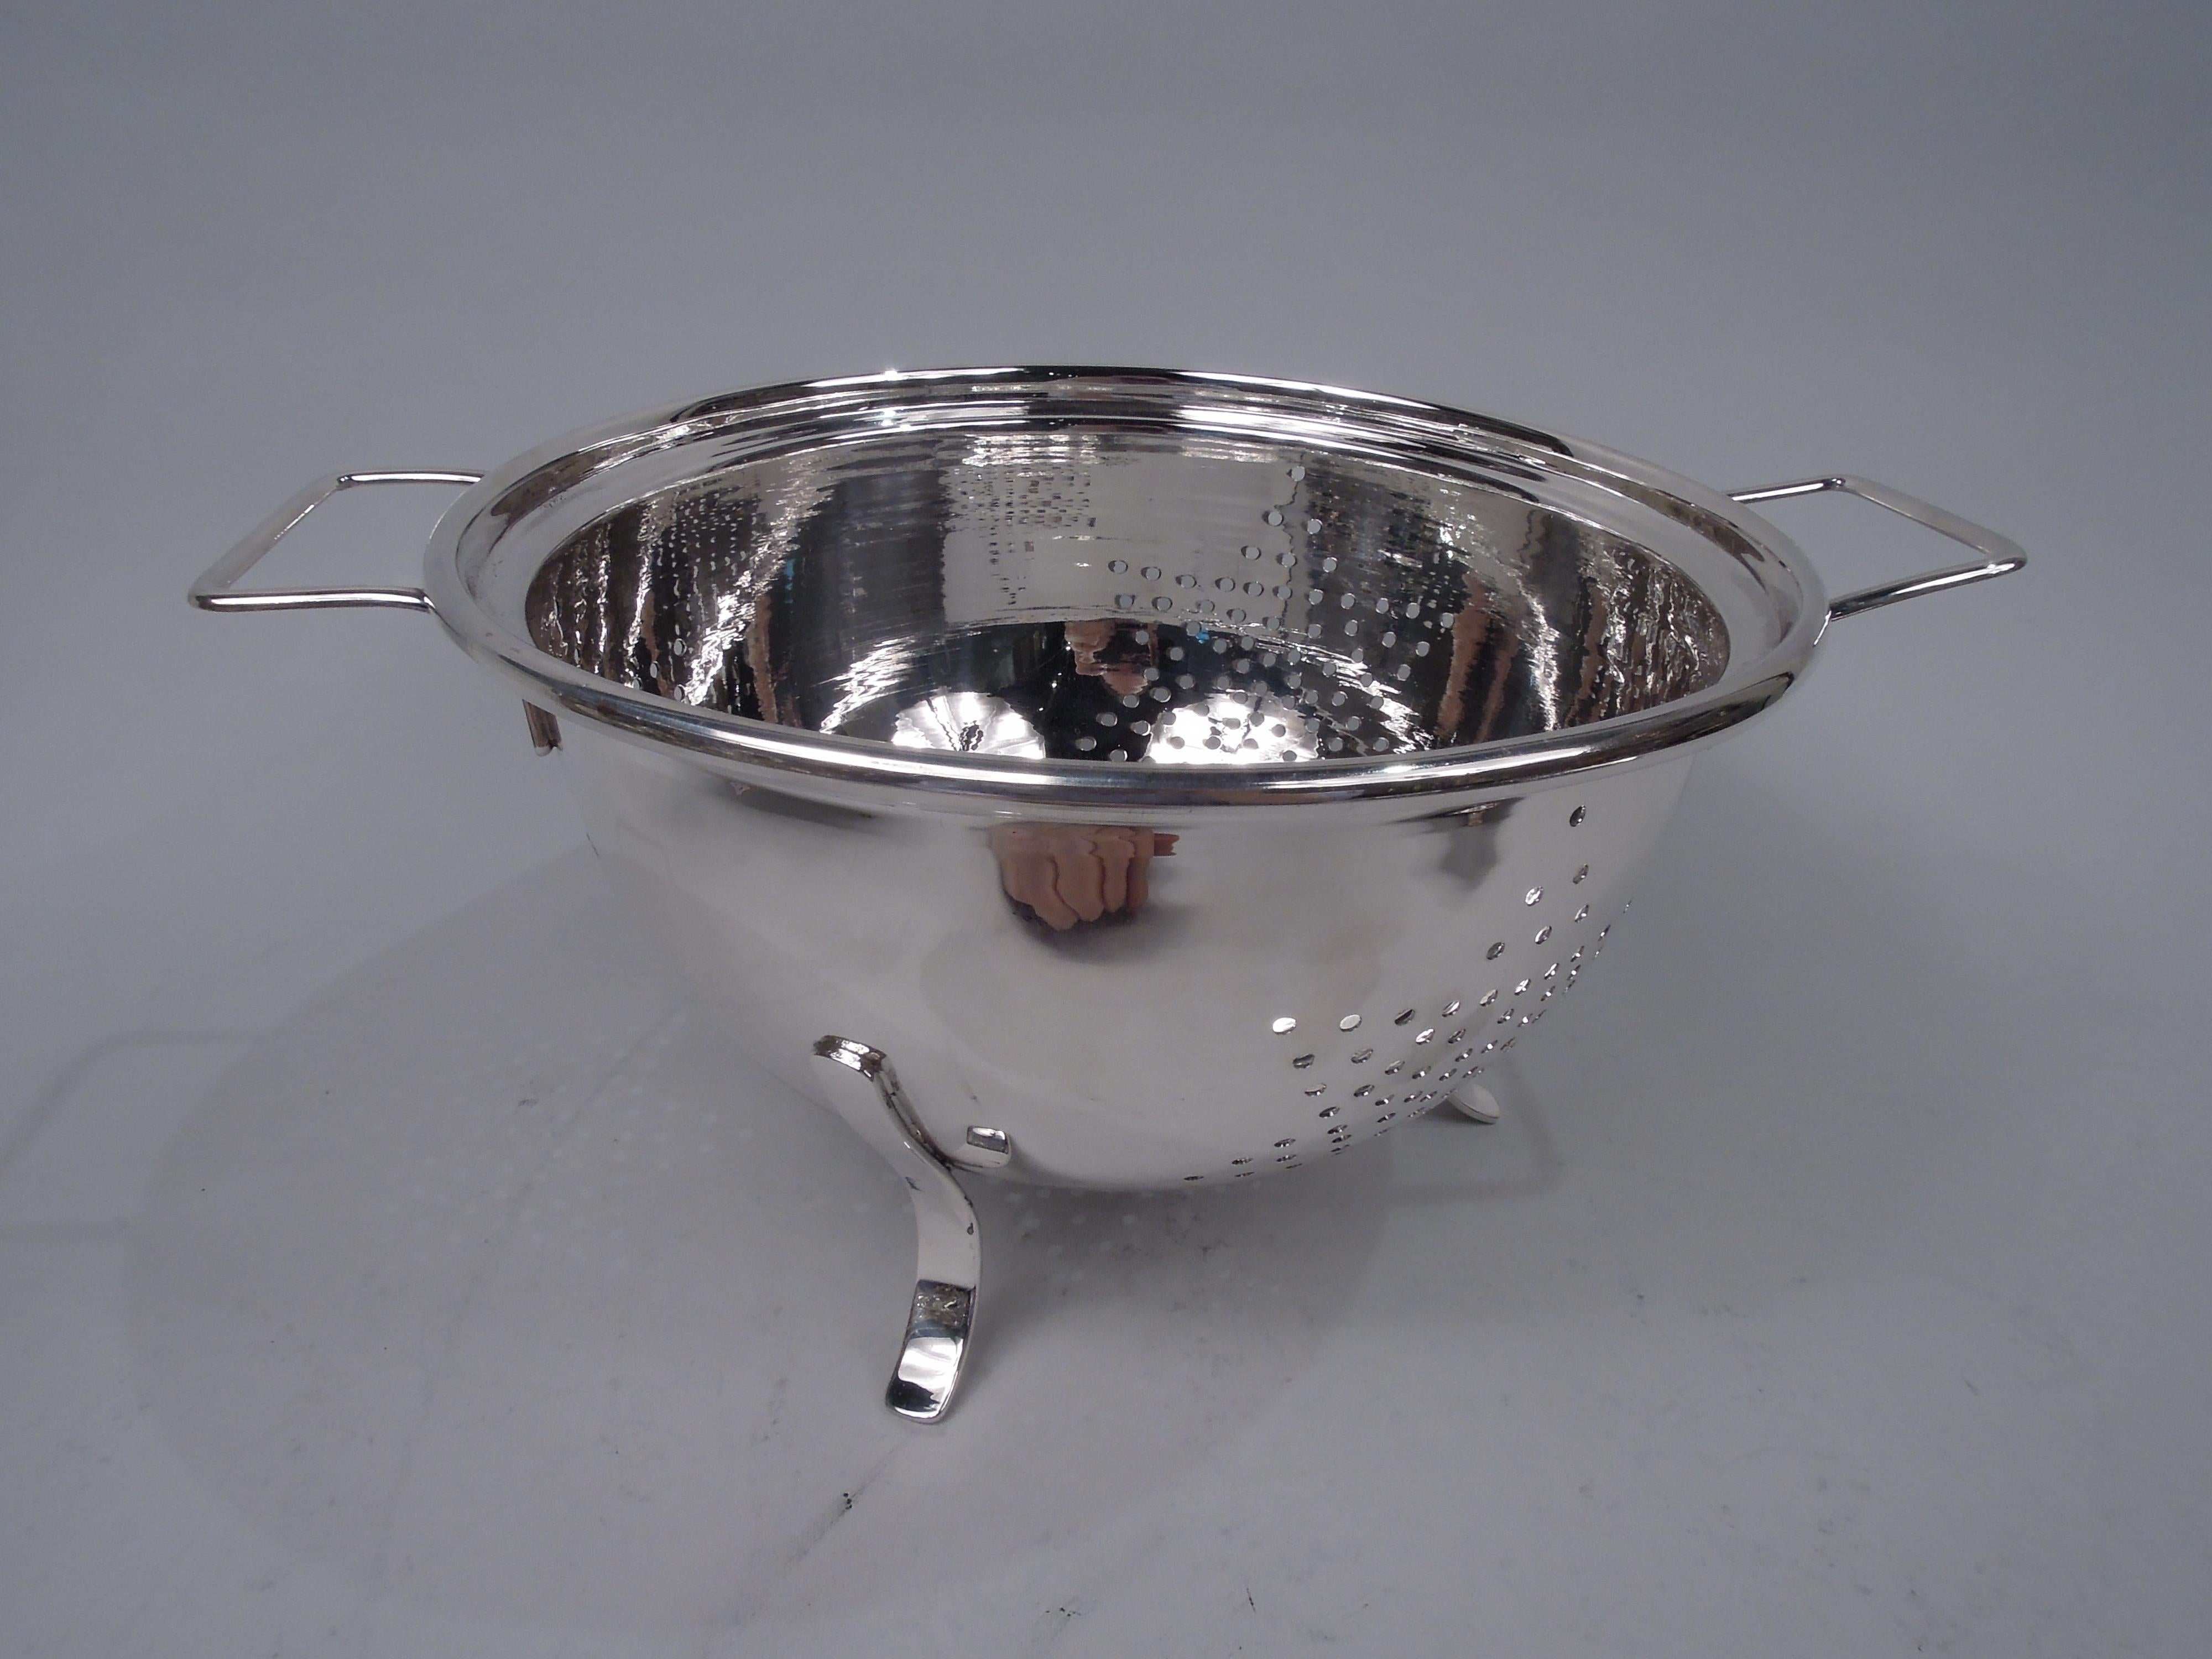 Super luxurious Modern sterling silver colander. Retailed by Cartier in New York. Round bowl with two bracket side handles and 3 scrolled supports. Four pierced stars. A practical kitchen accessory wrought in precious metal. Fully marked including